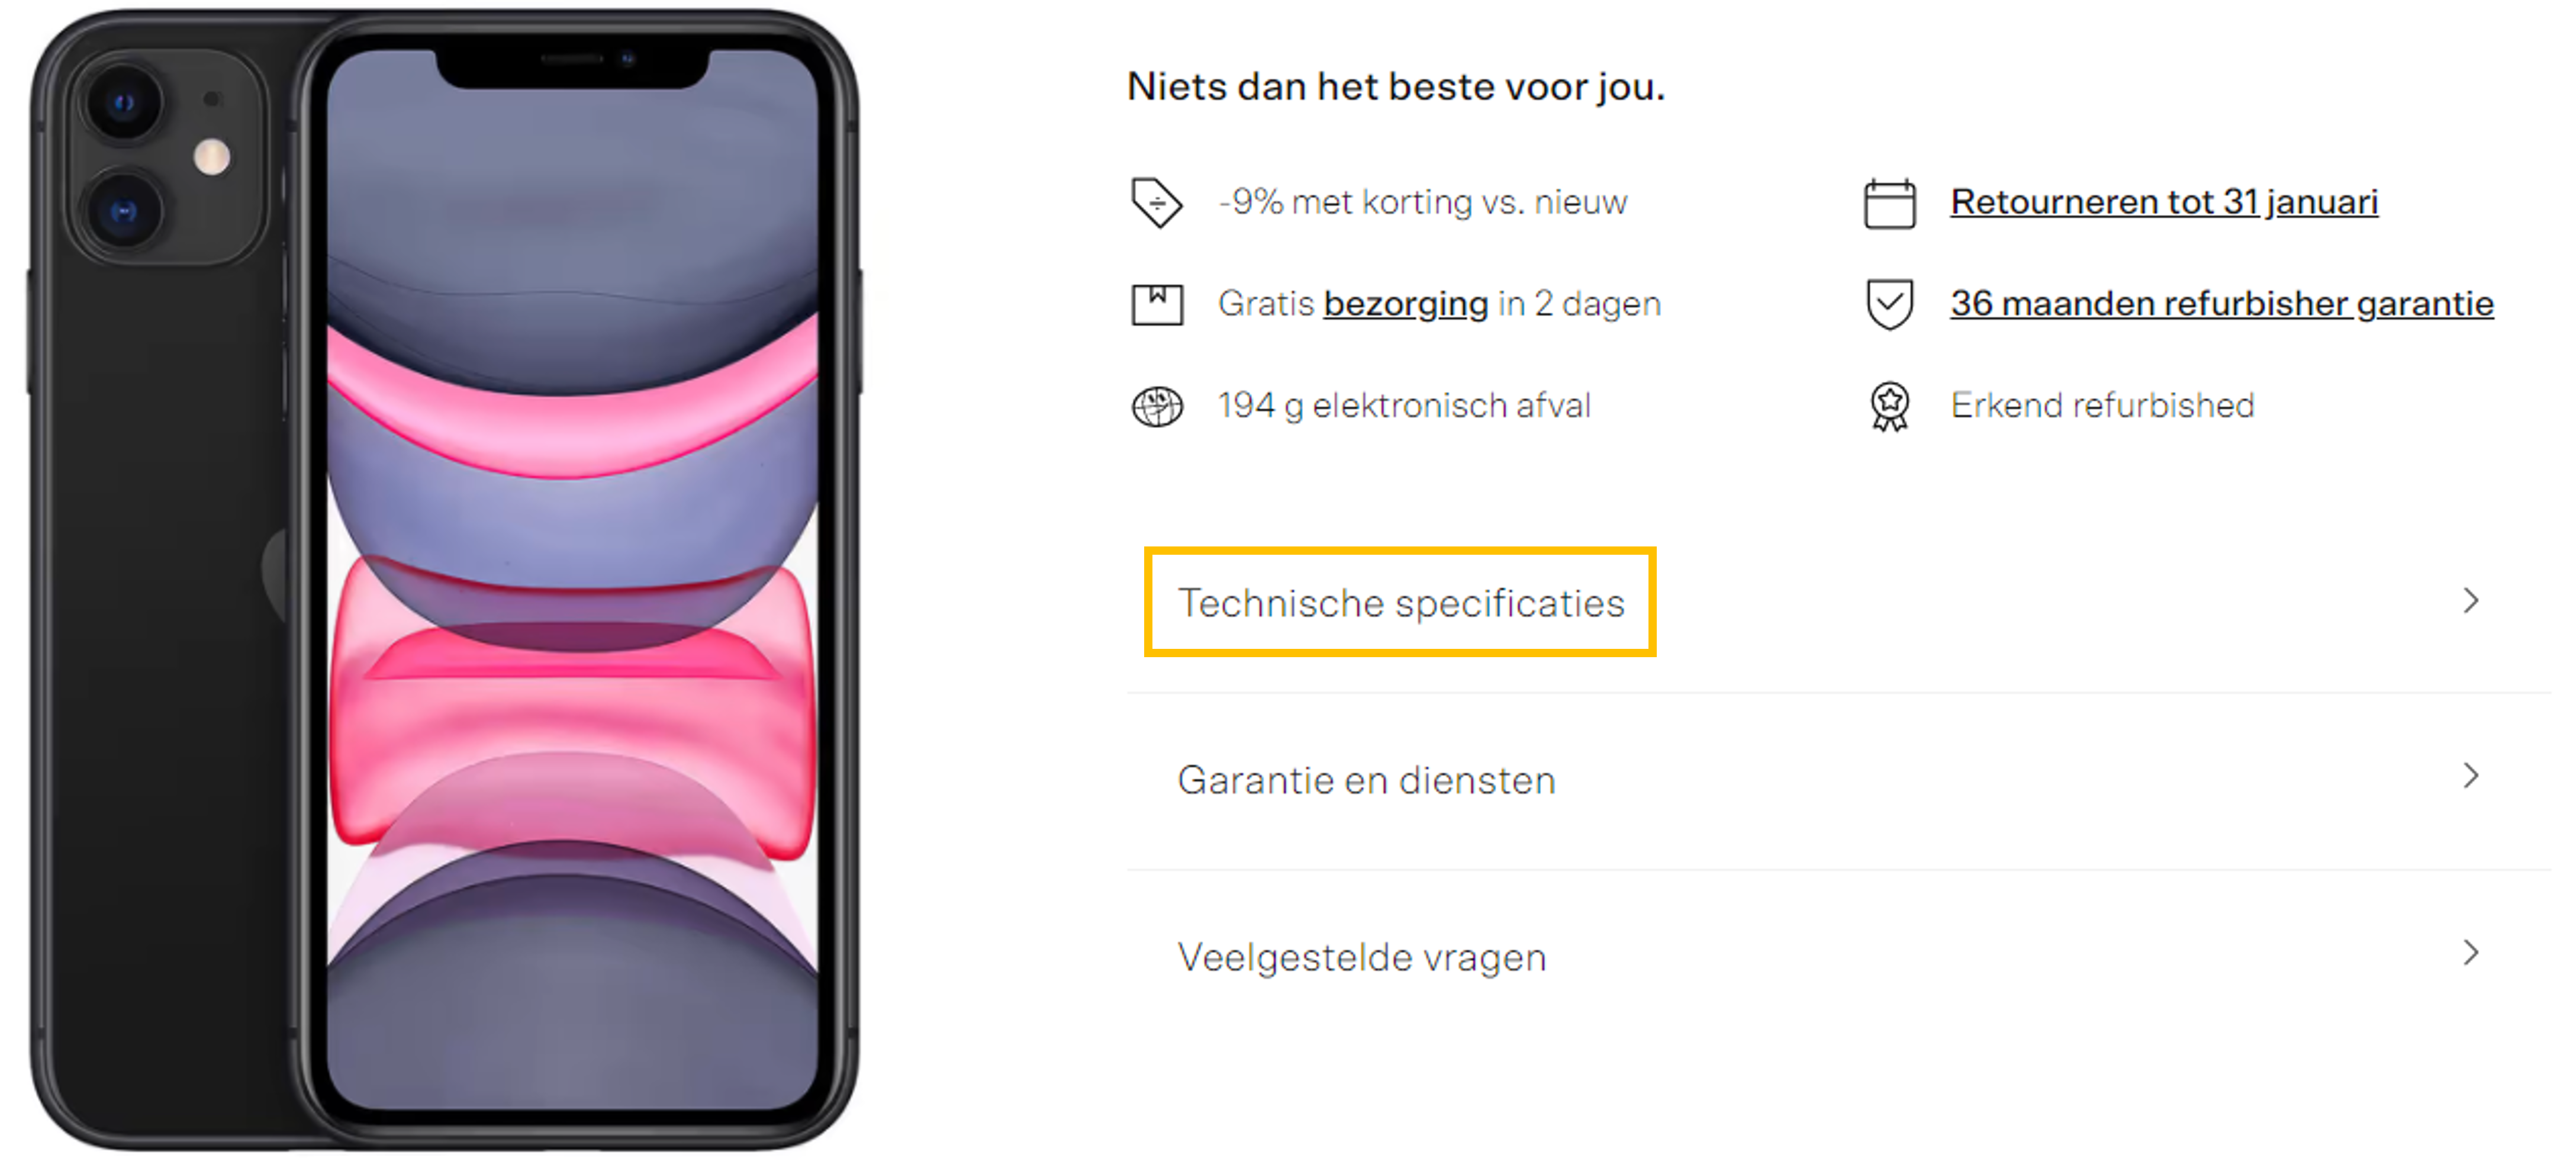 iphone11_NL.png